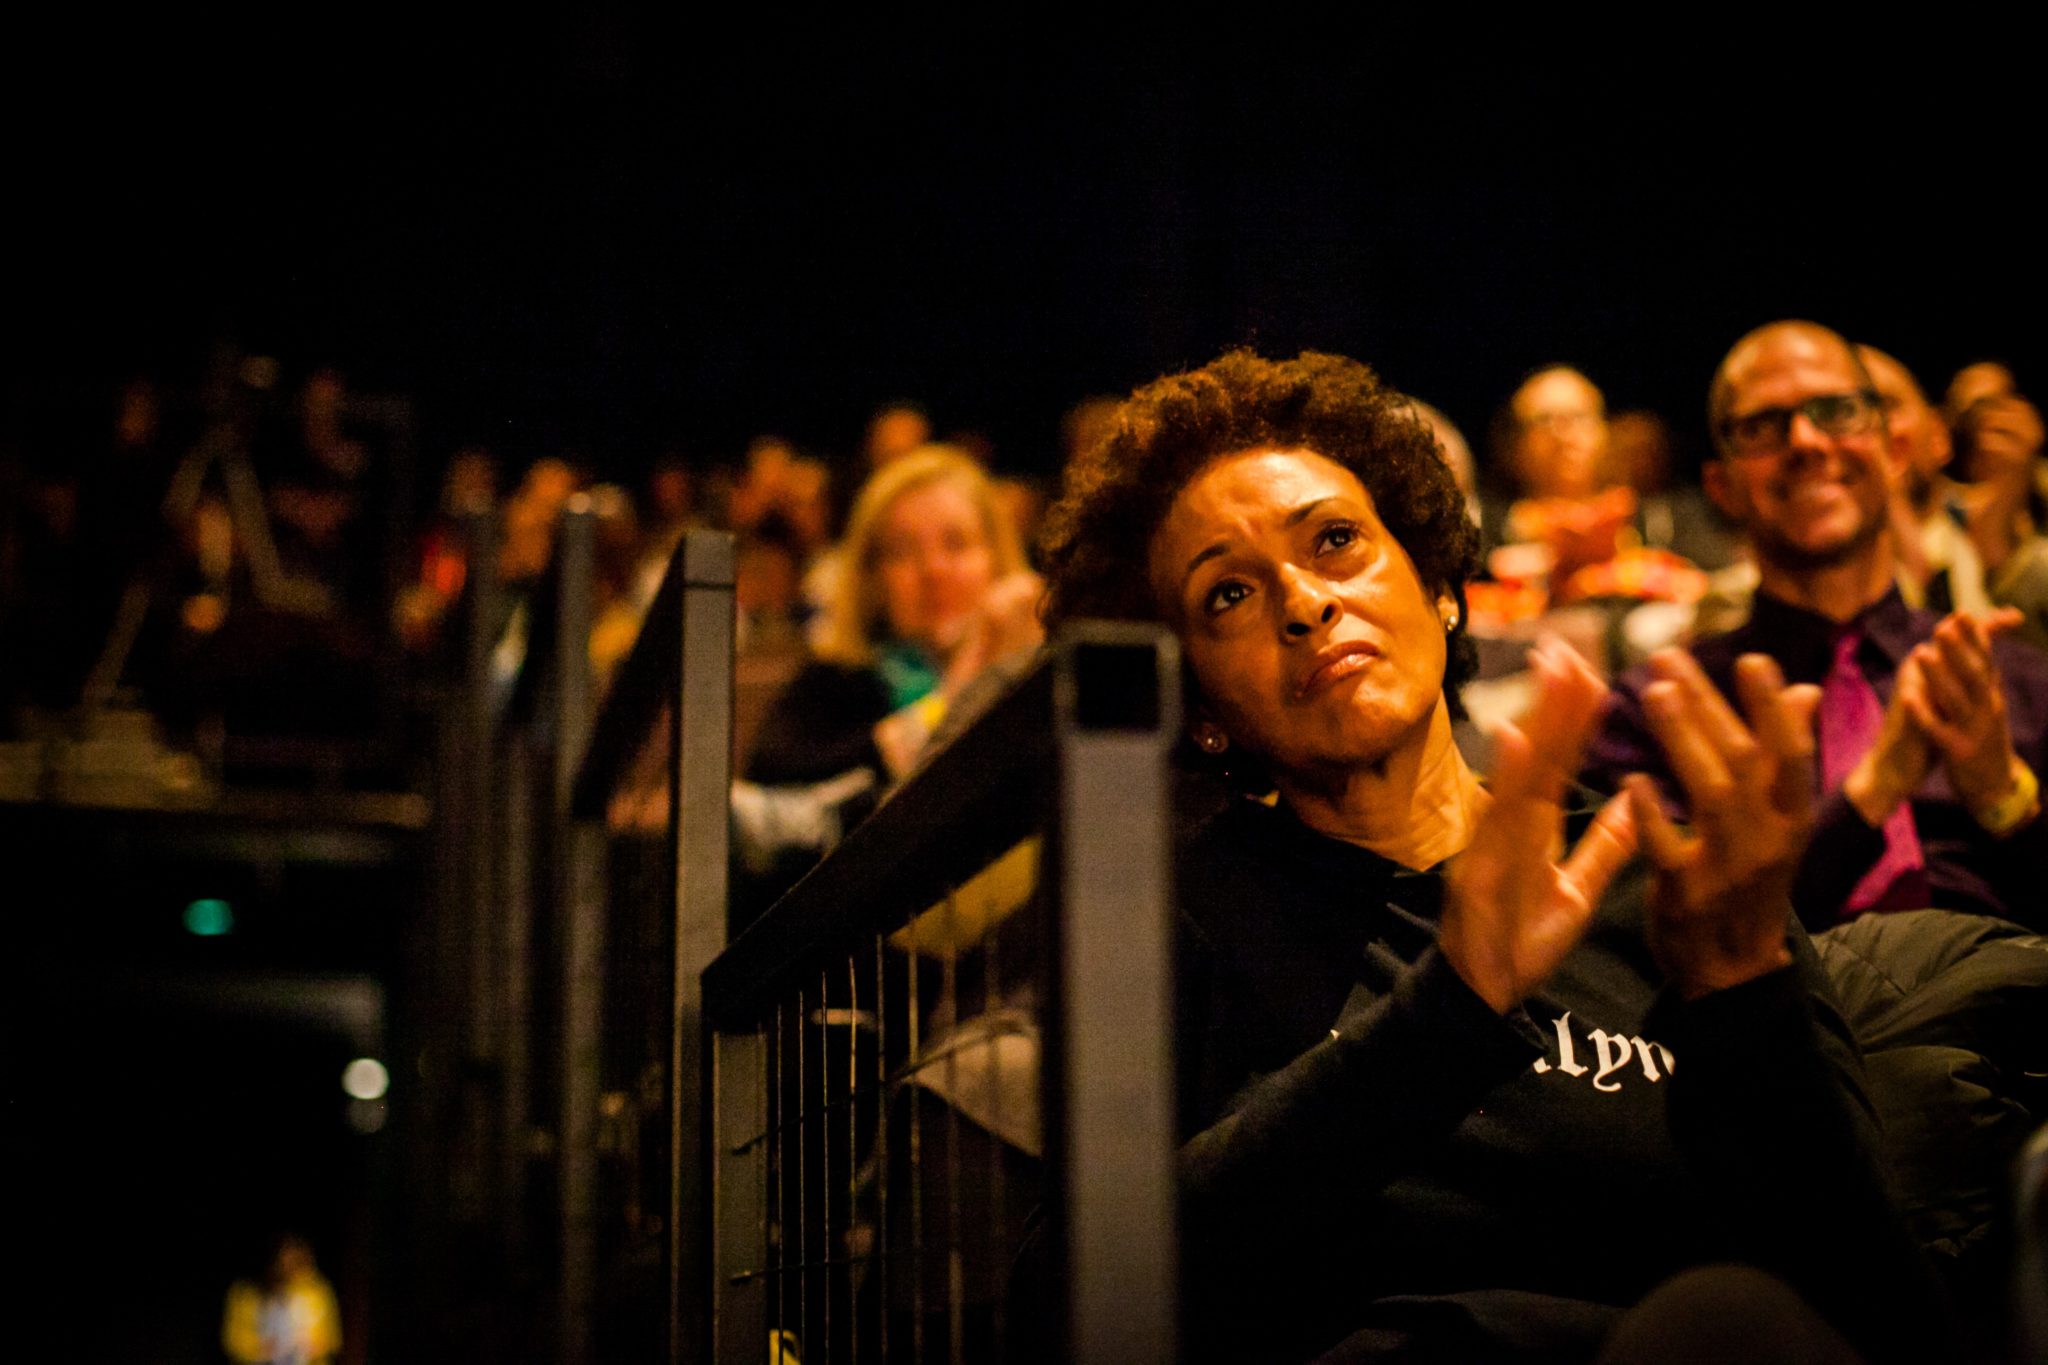 A woman claps in the audience of a performance.